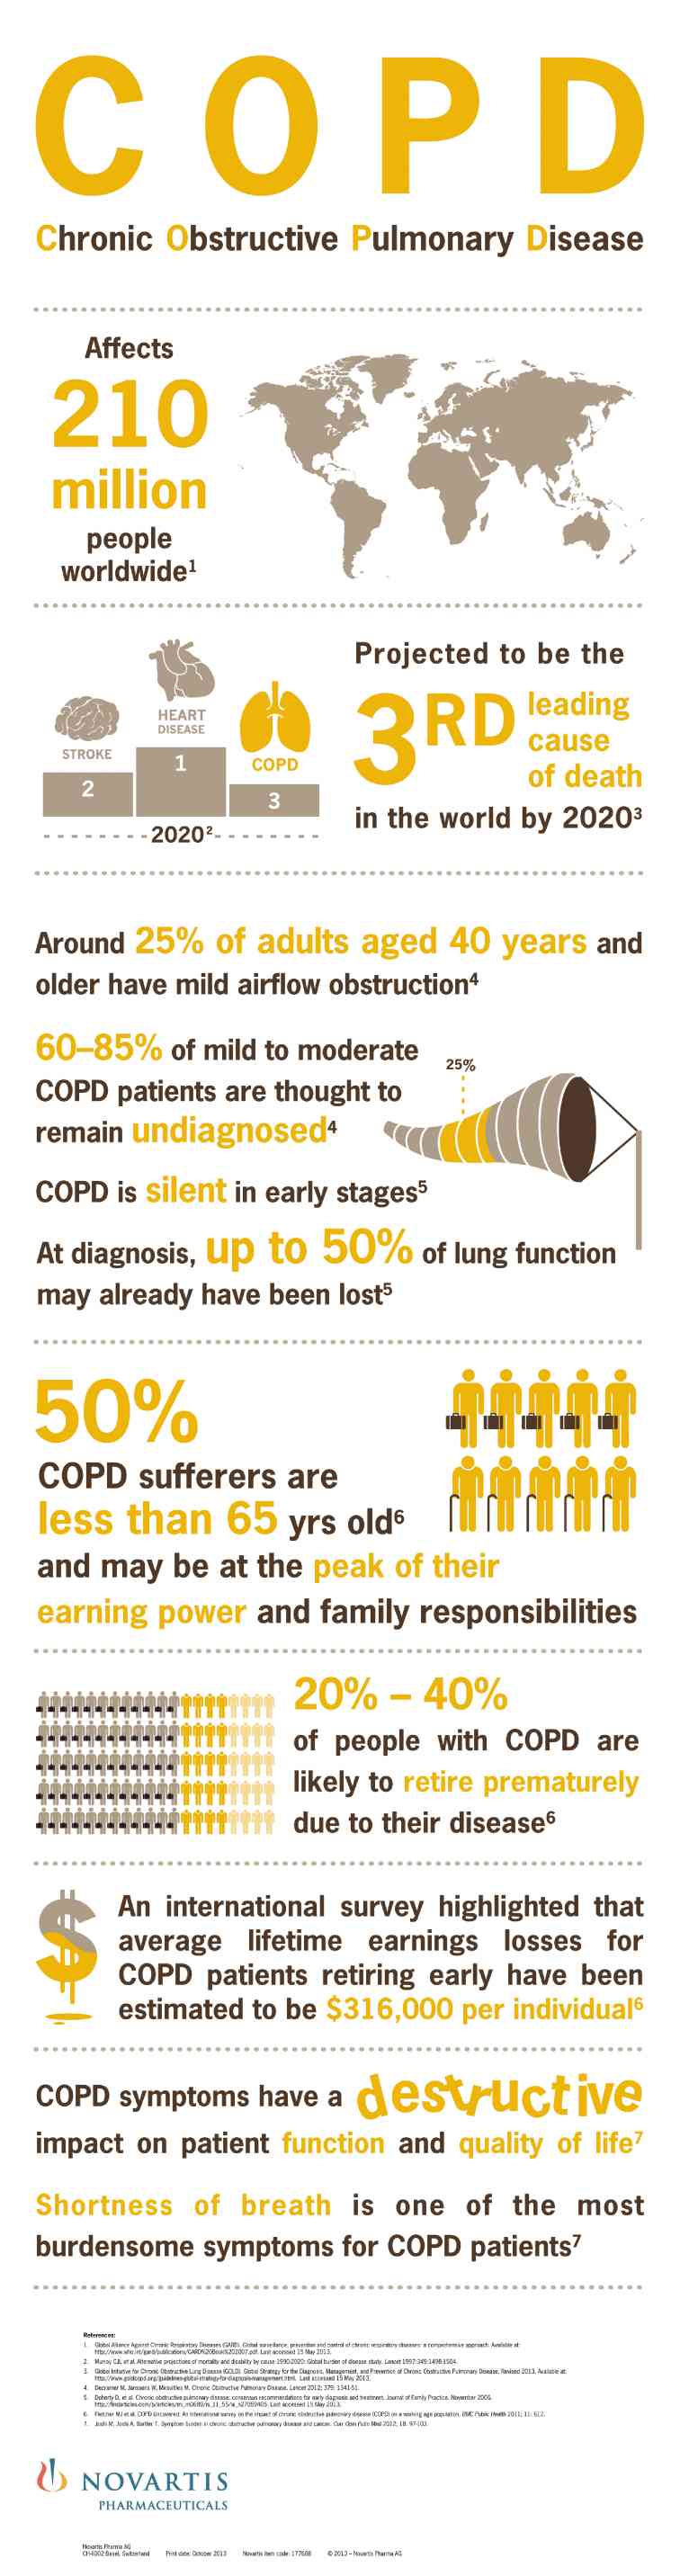 New effective treatment for COPD patients | Inquirer Business